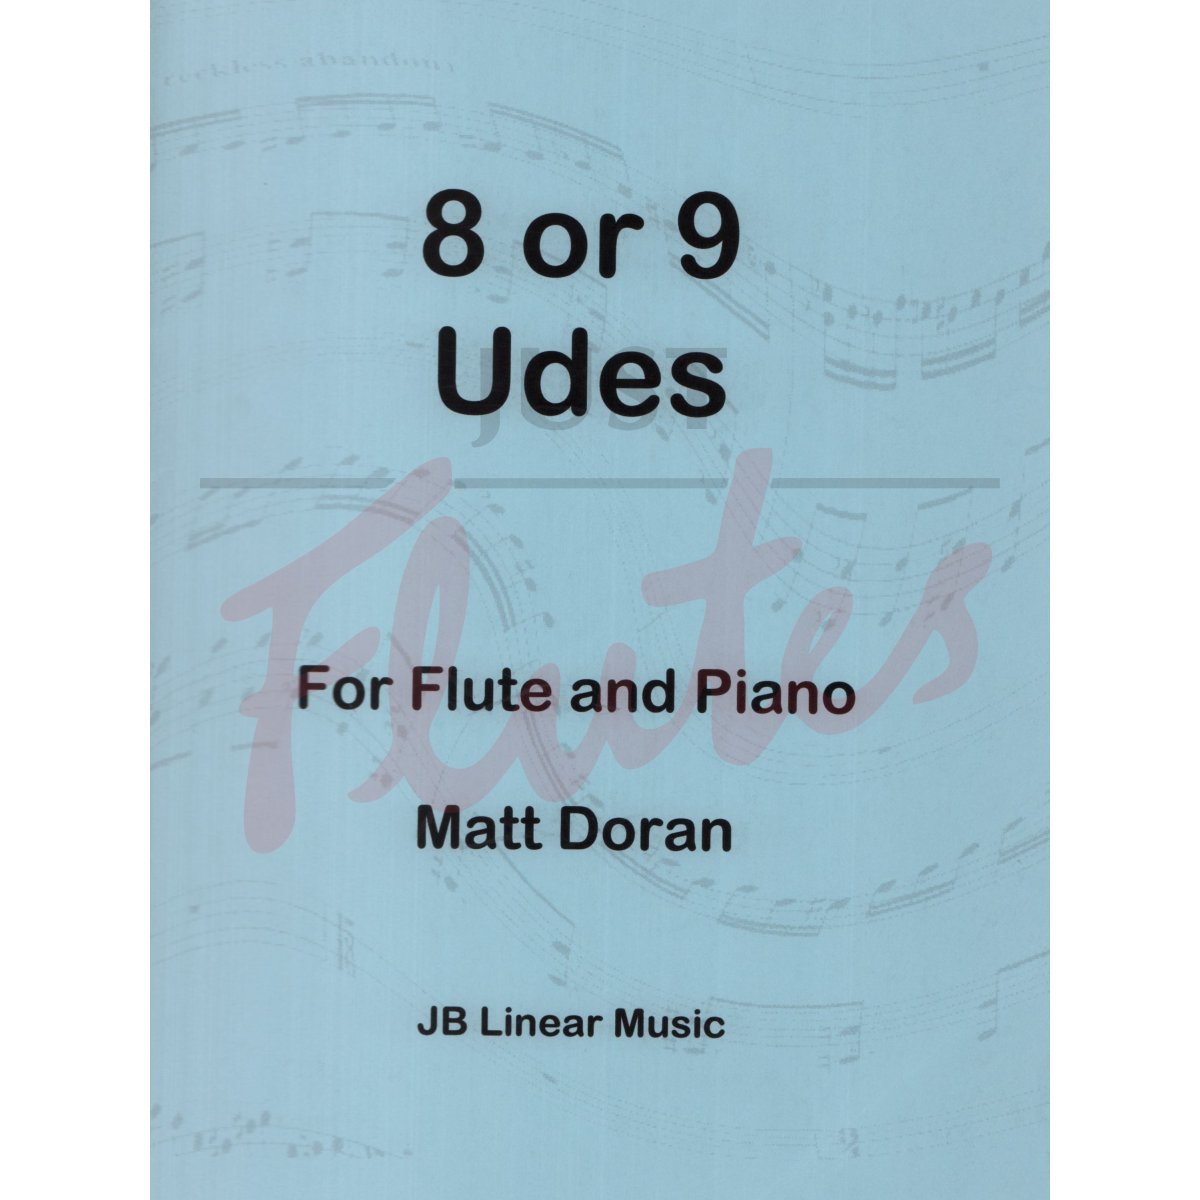 8 or 9 Udes for Flute and Piano 